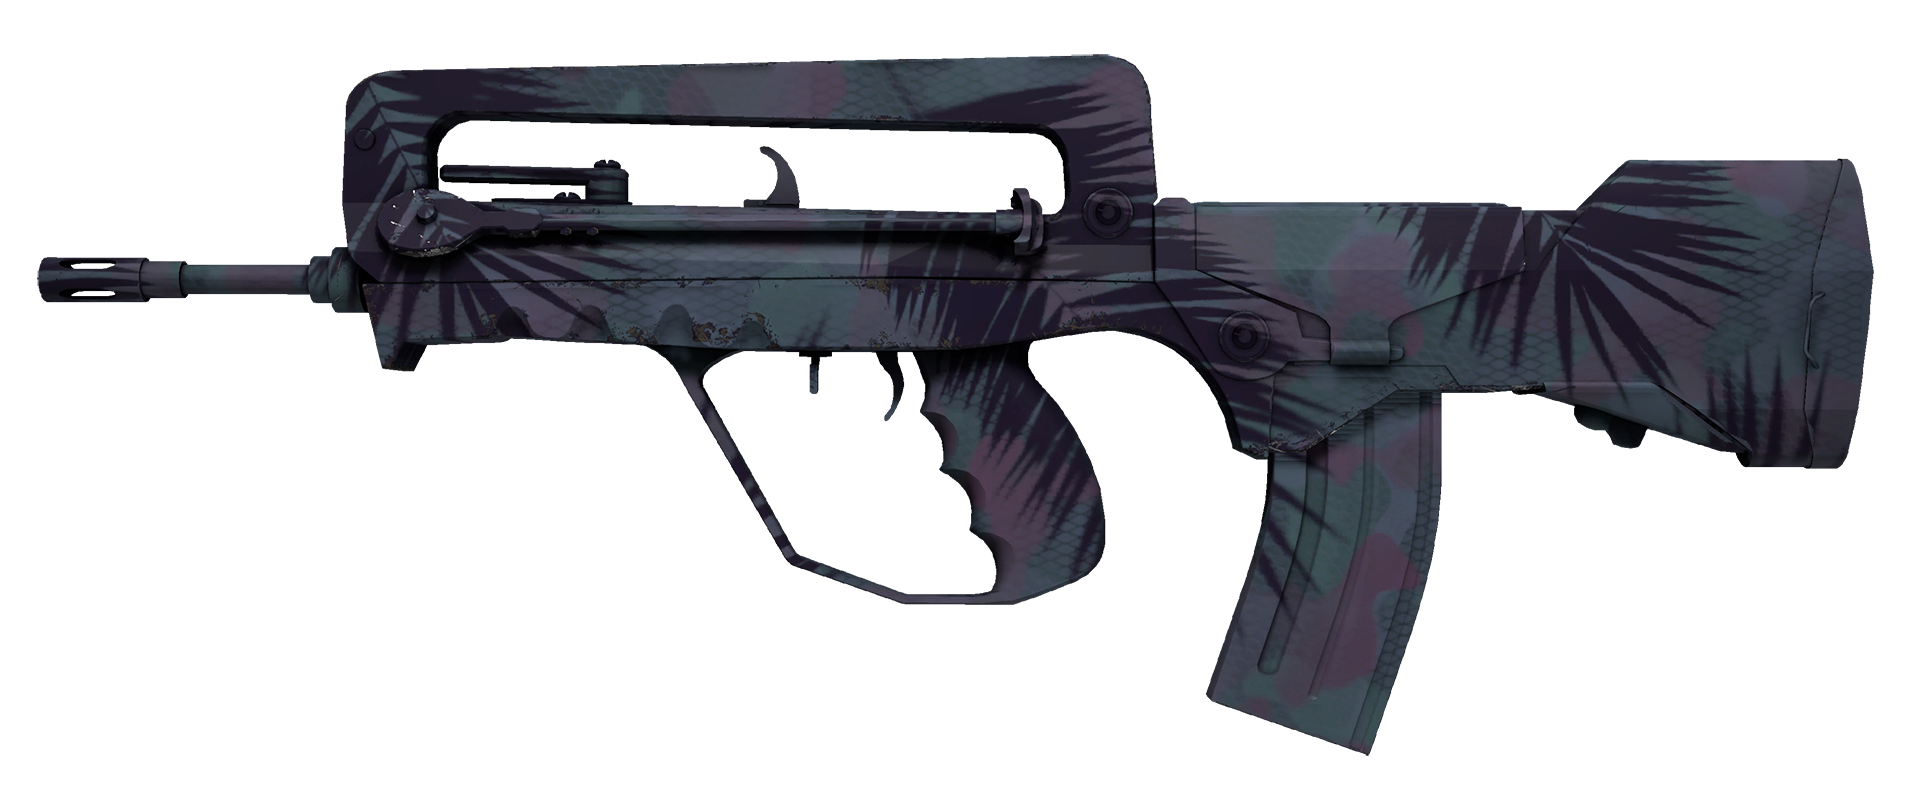 FAMAS Colony cs go skin for ipod download